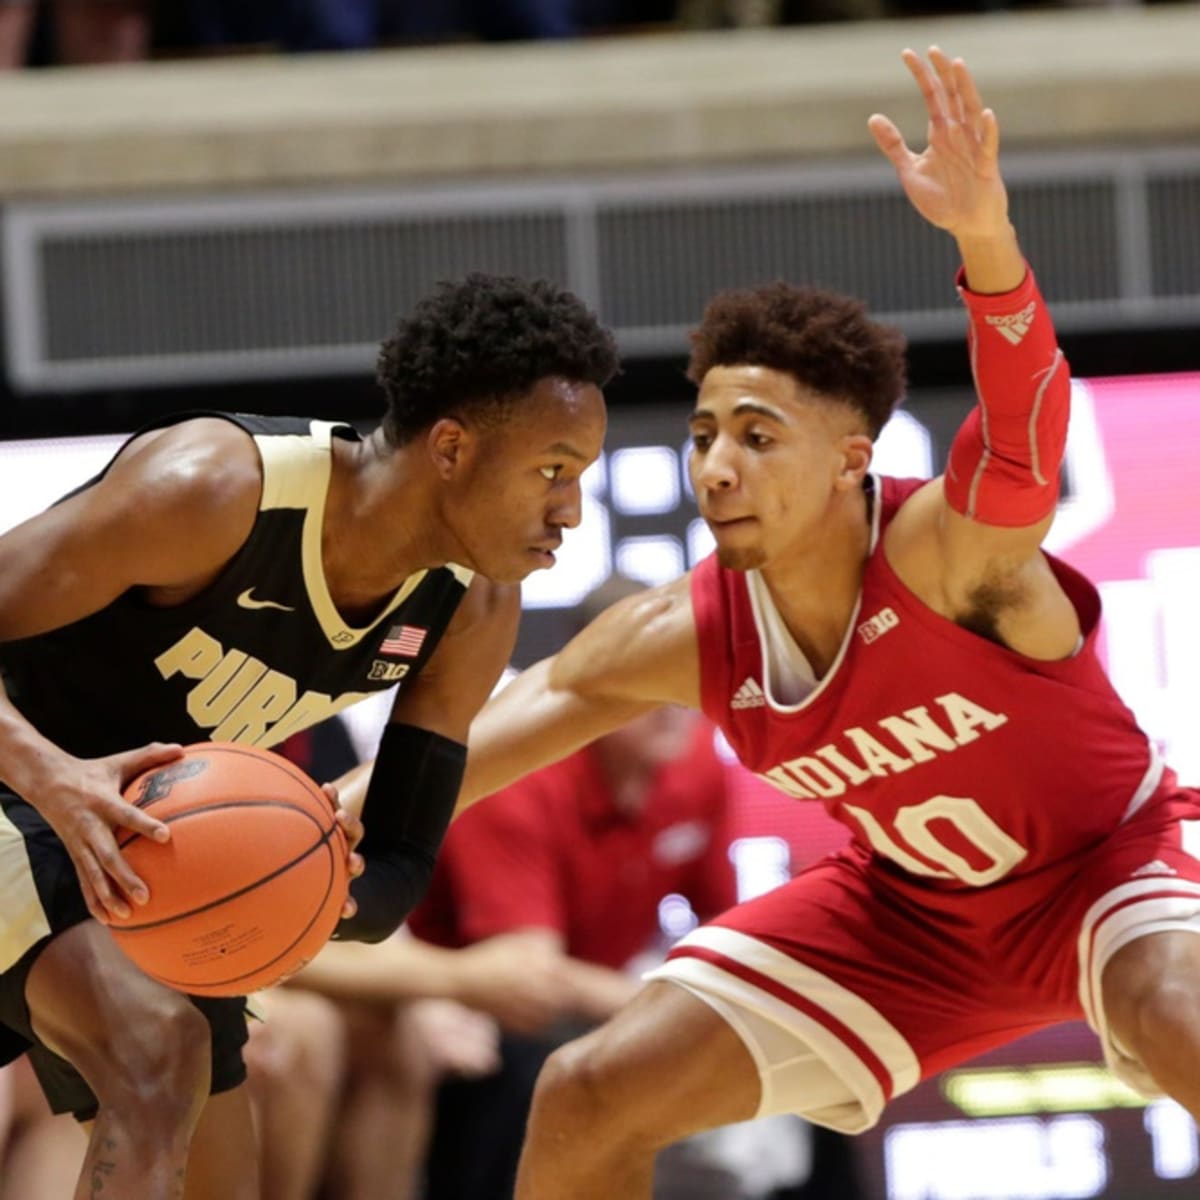 Iu Basketball Schedule 2022 23 Indiana's 2021-22 Big Ten Basketball Schedule Released - Sports Illustrated Indiana  Hoosiers News, Analysis And More